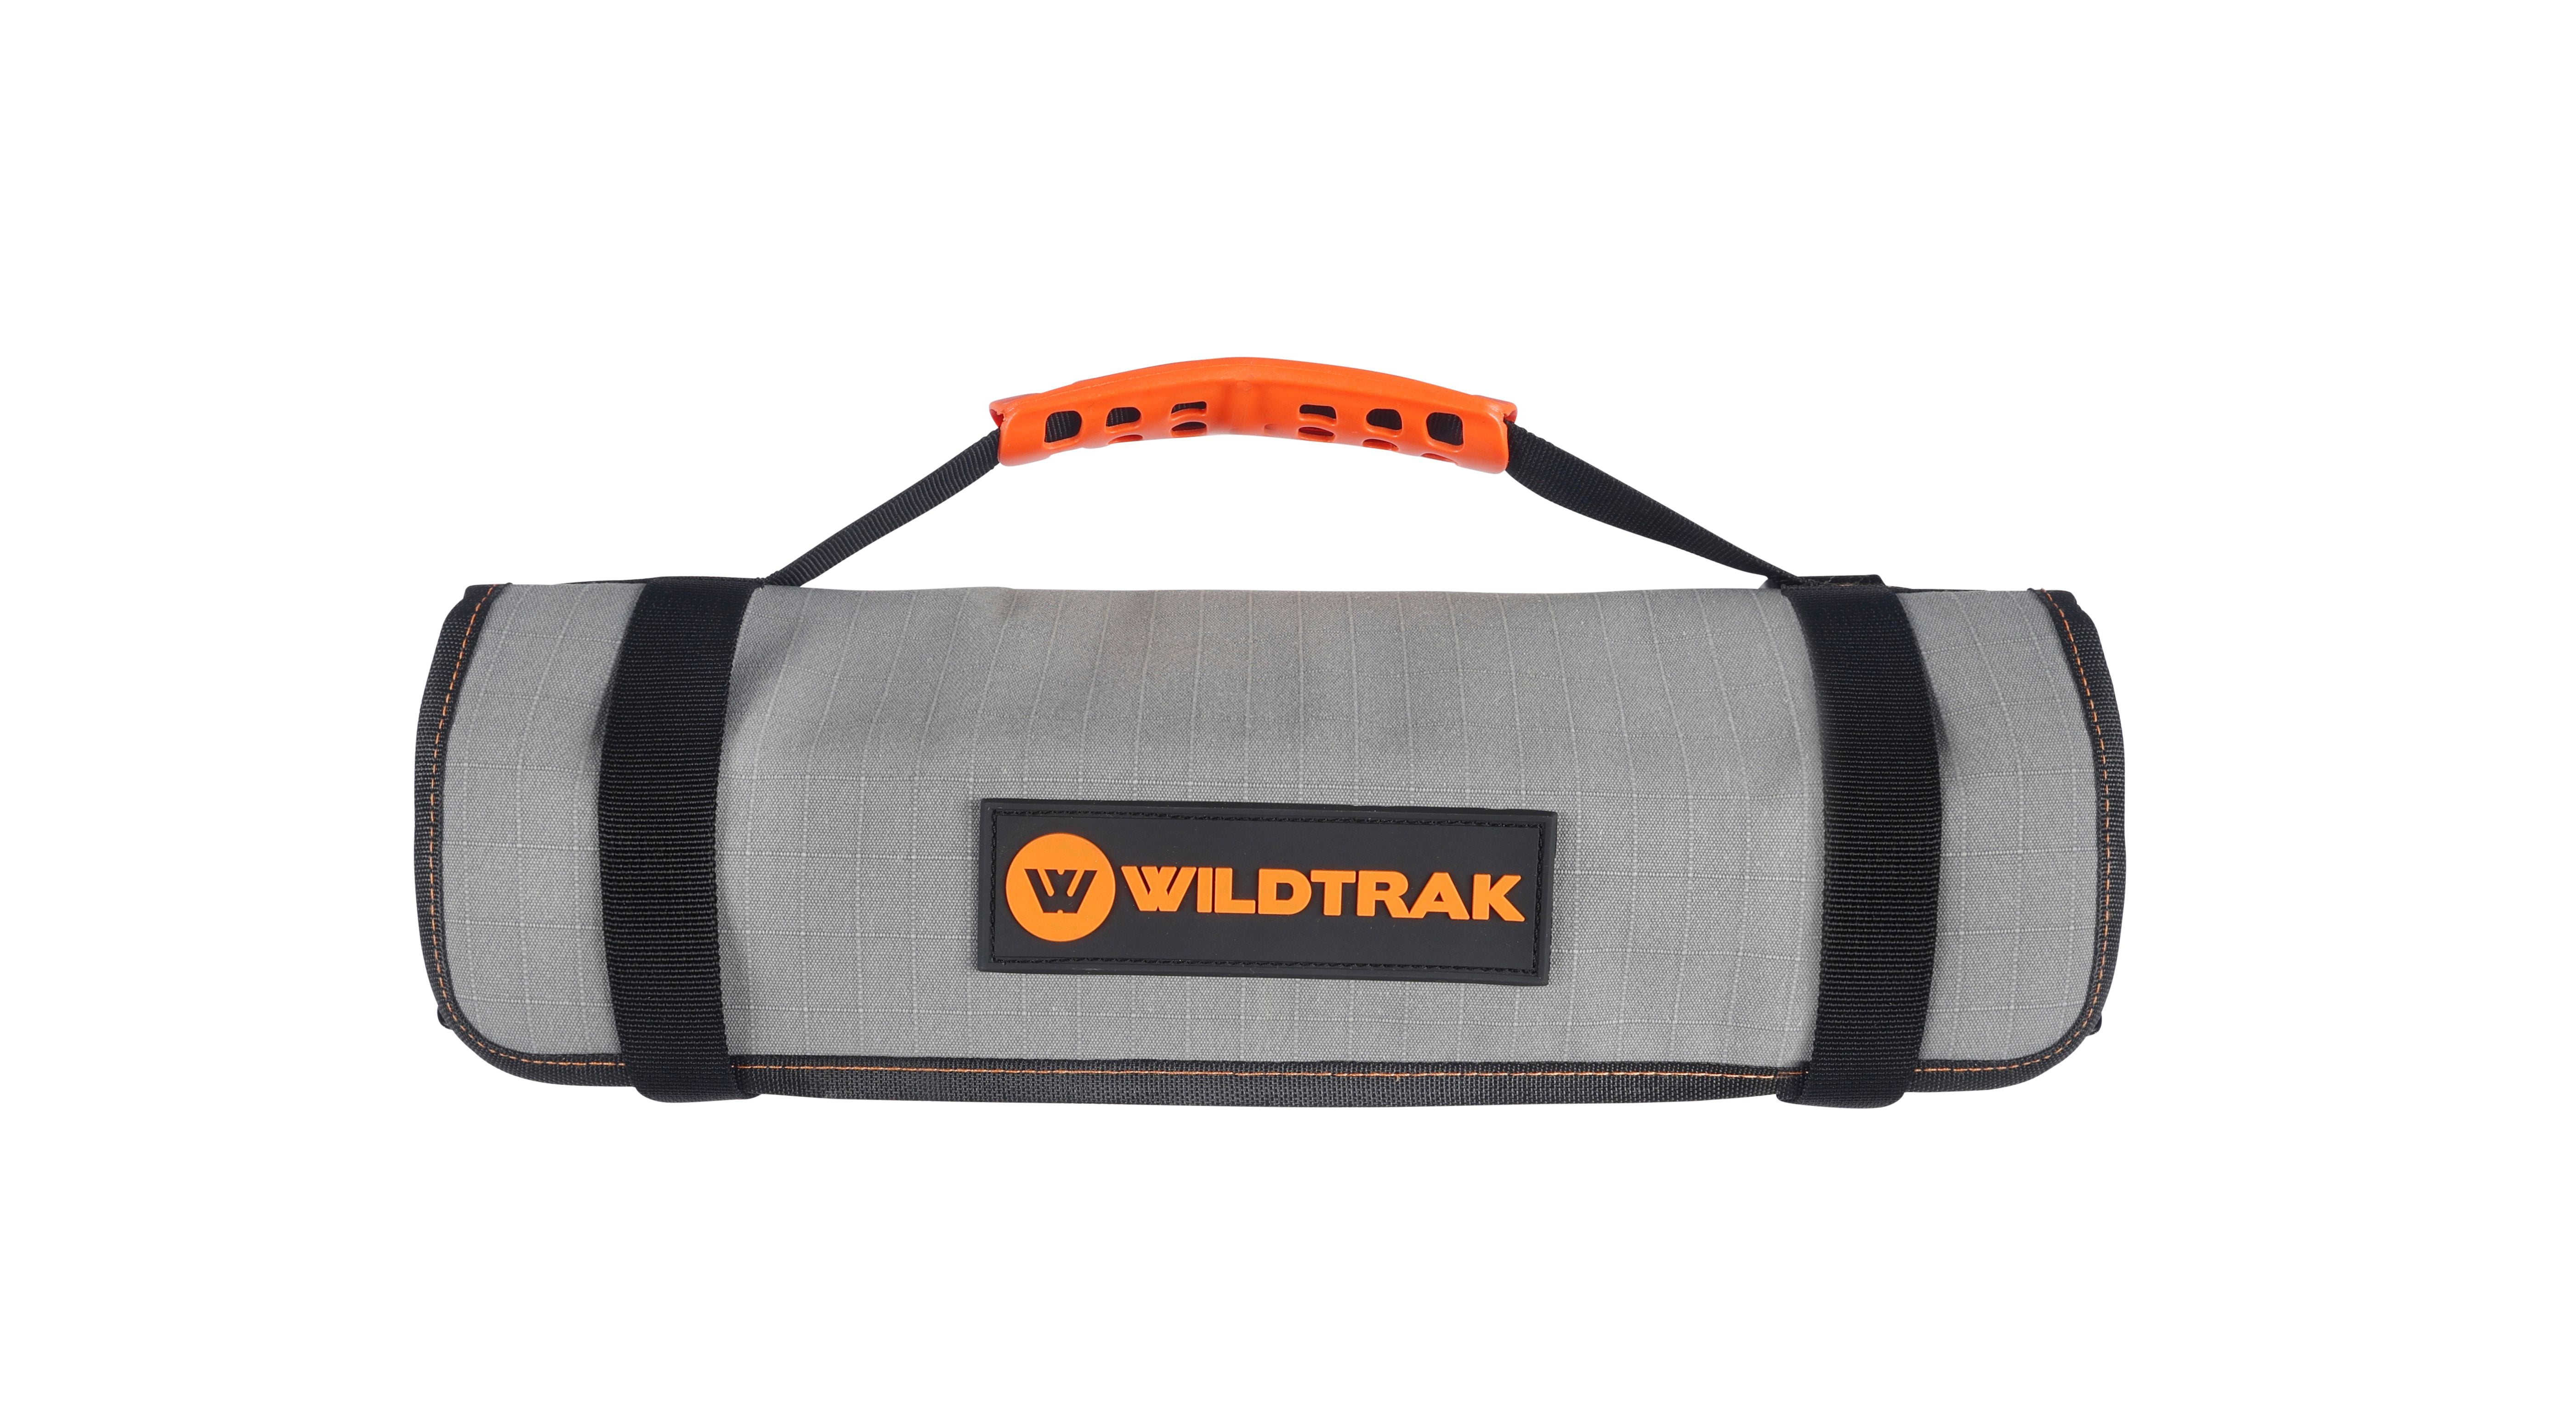 Wildtrak™ Large Hangable Camping Storage Organiser Utility Roll for Toiletries, Kitchen Utensils, Tools & More - 400GSM Ripstop Canvas (60 X 40CM)